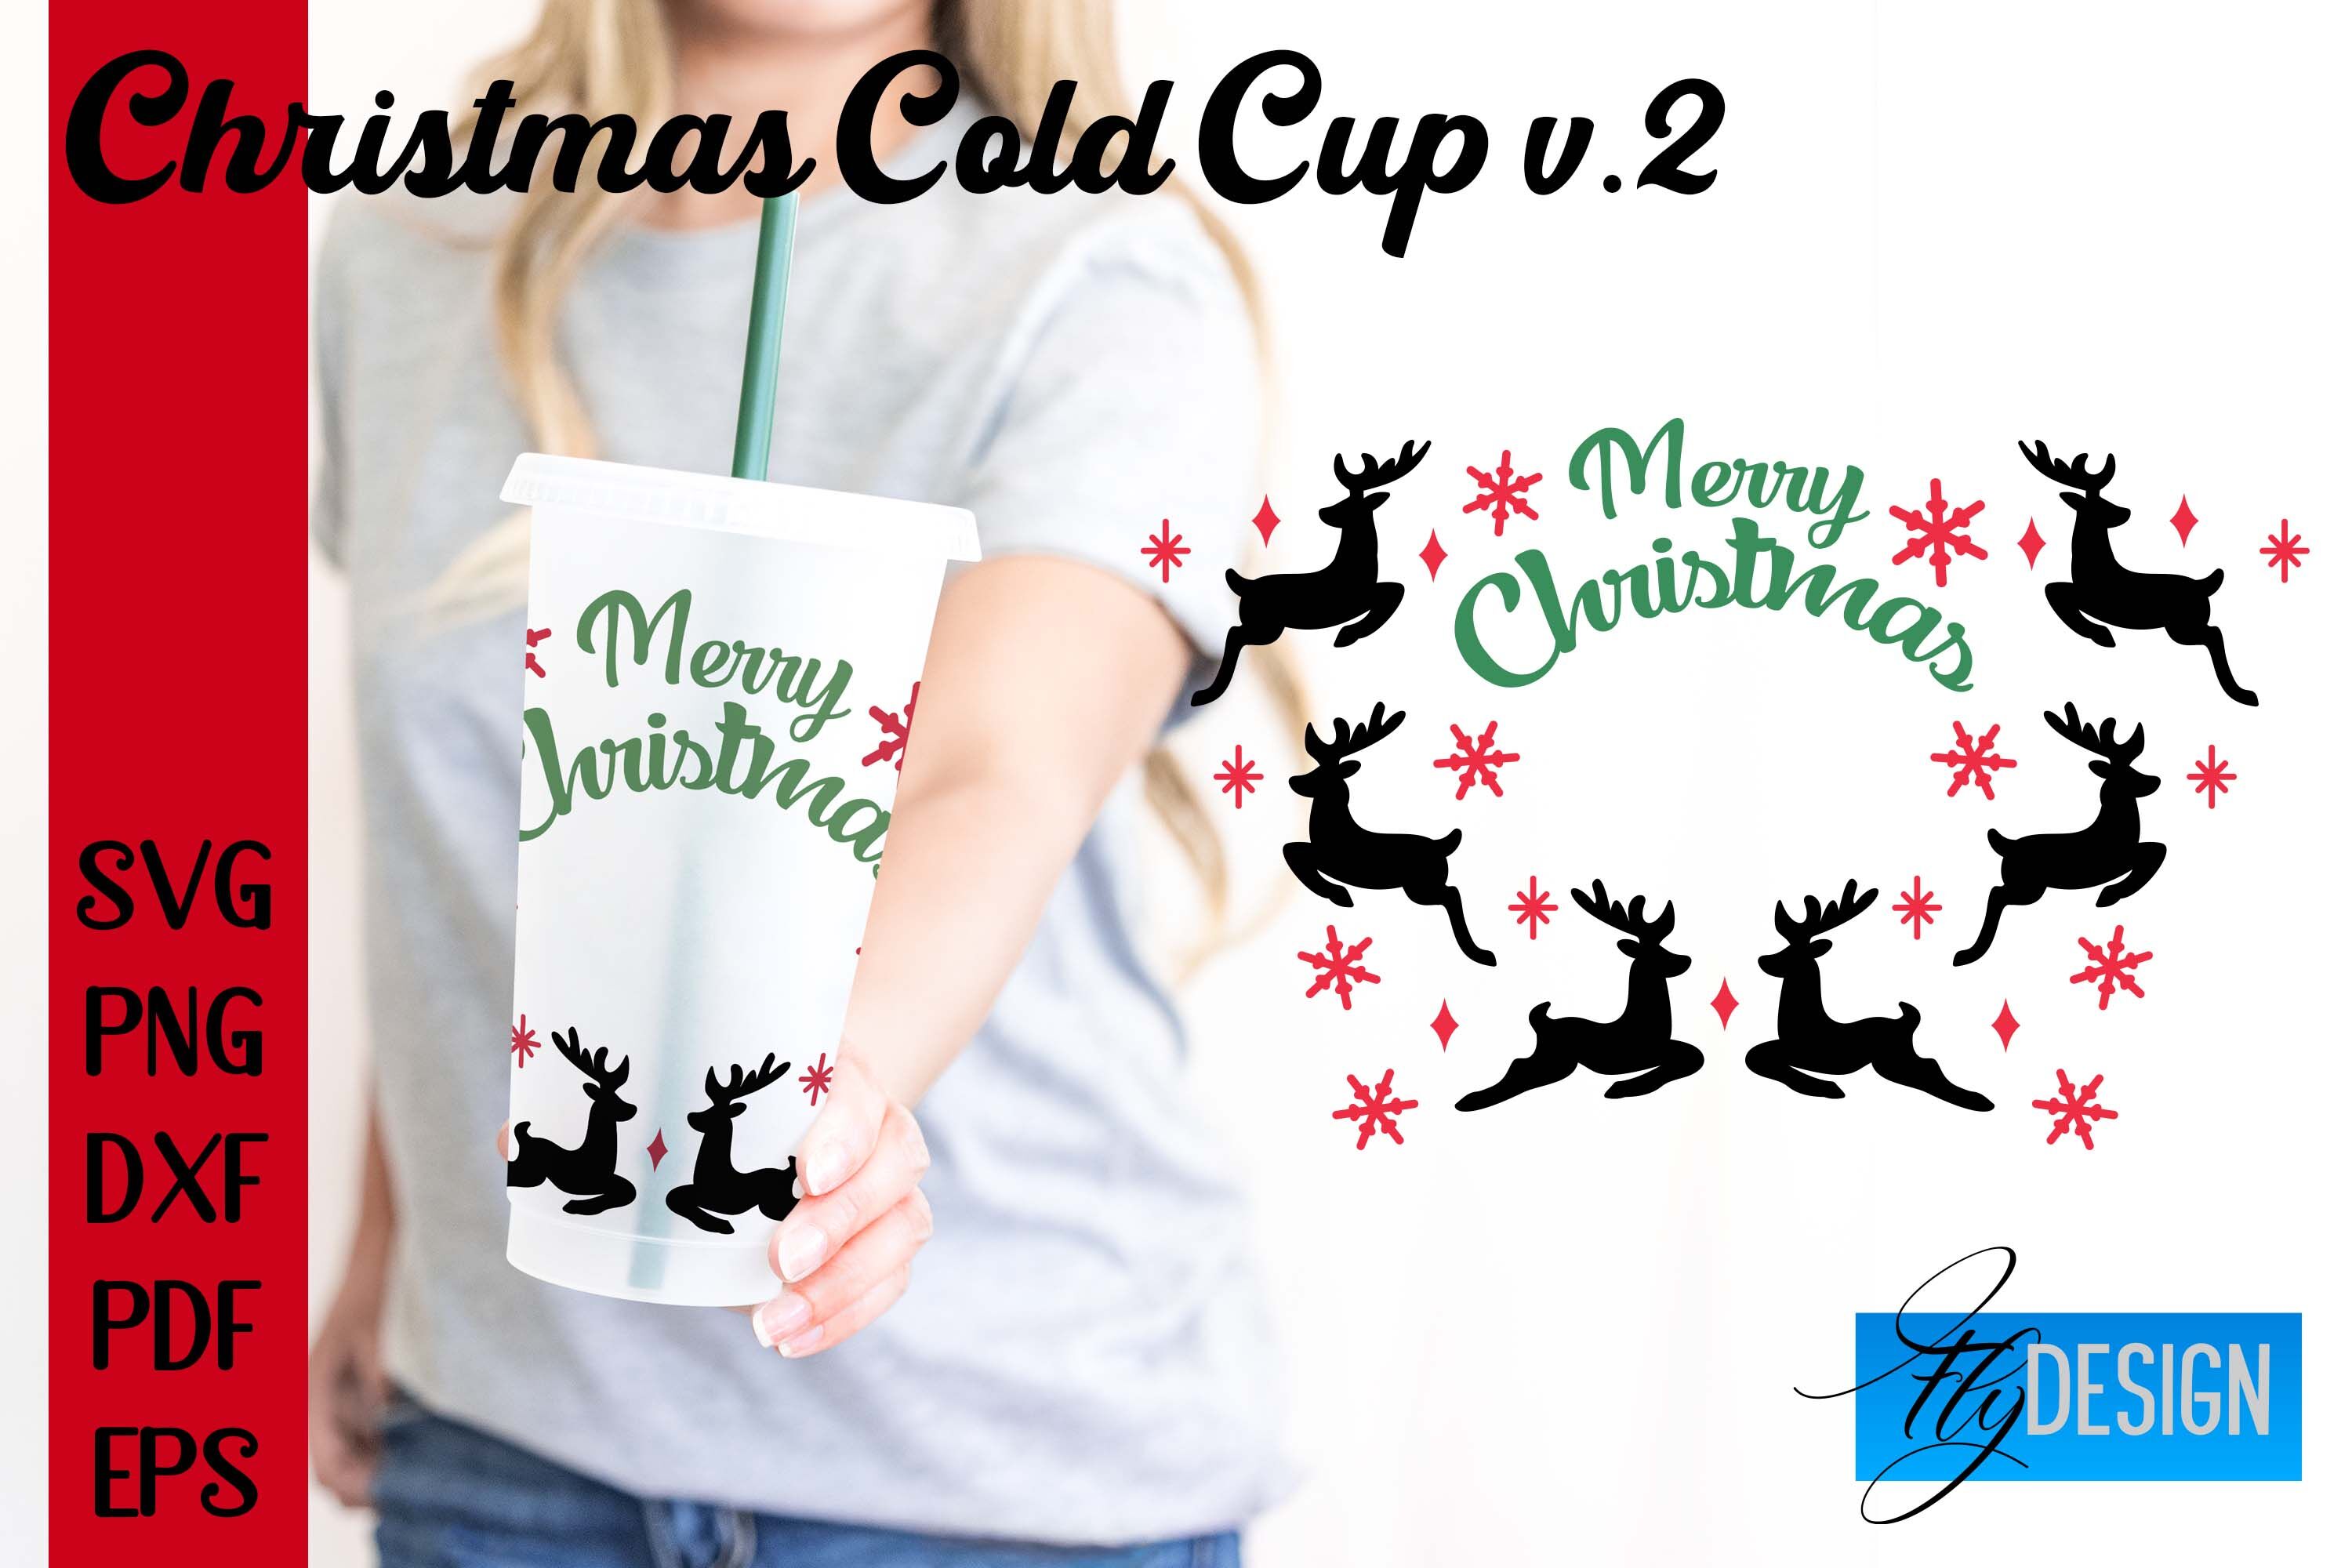 Merry Christmas SVG Cold Cup Wrap